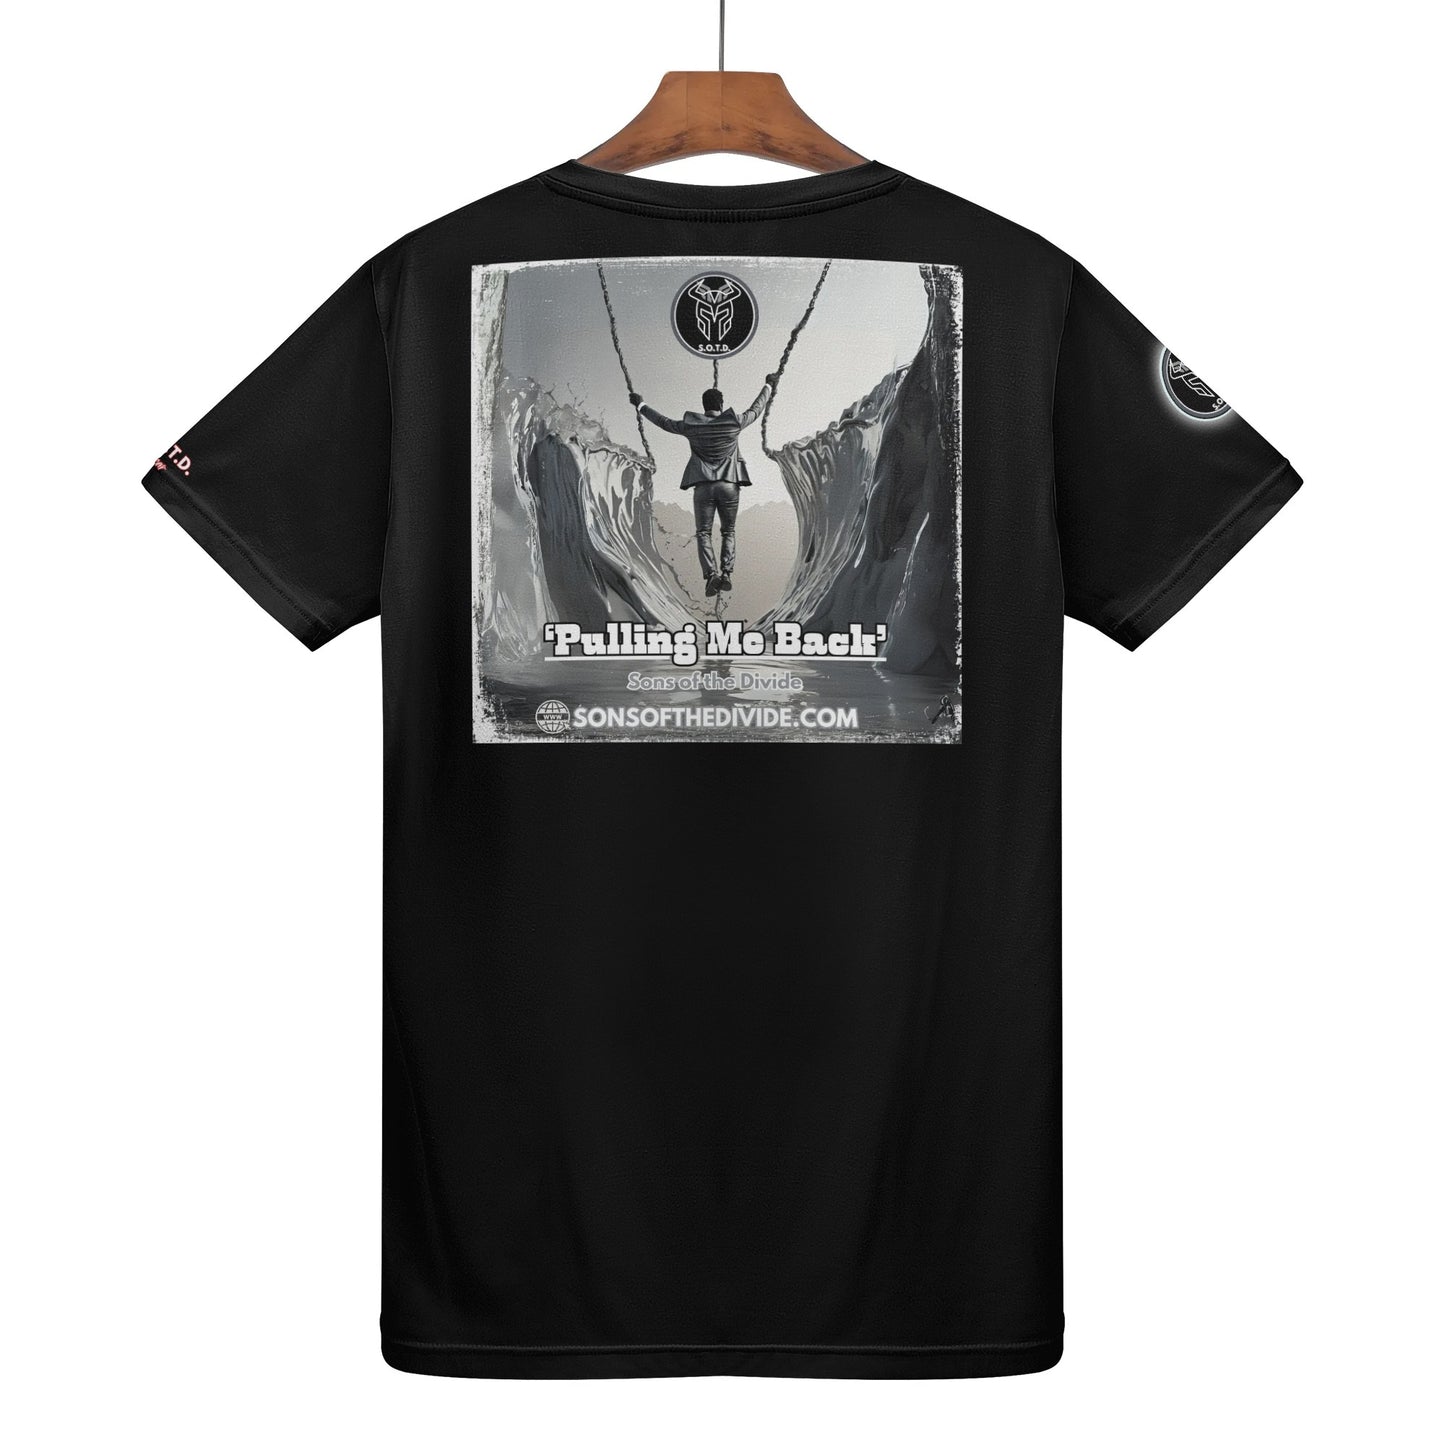 Sons of the Divide- Grey Rectangle Logo- Pulling Me Back album art Graphic T-Shirt